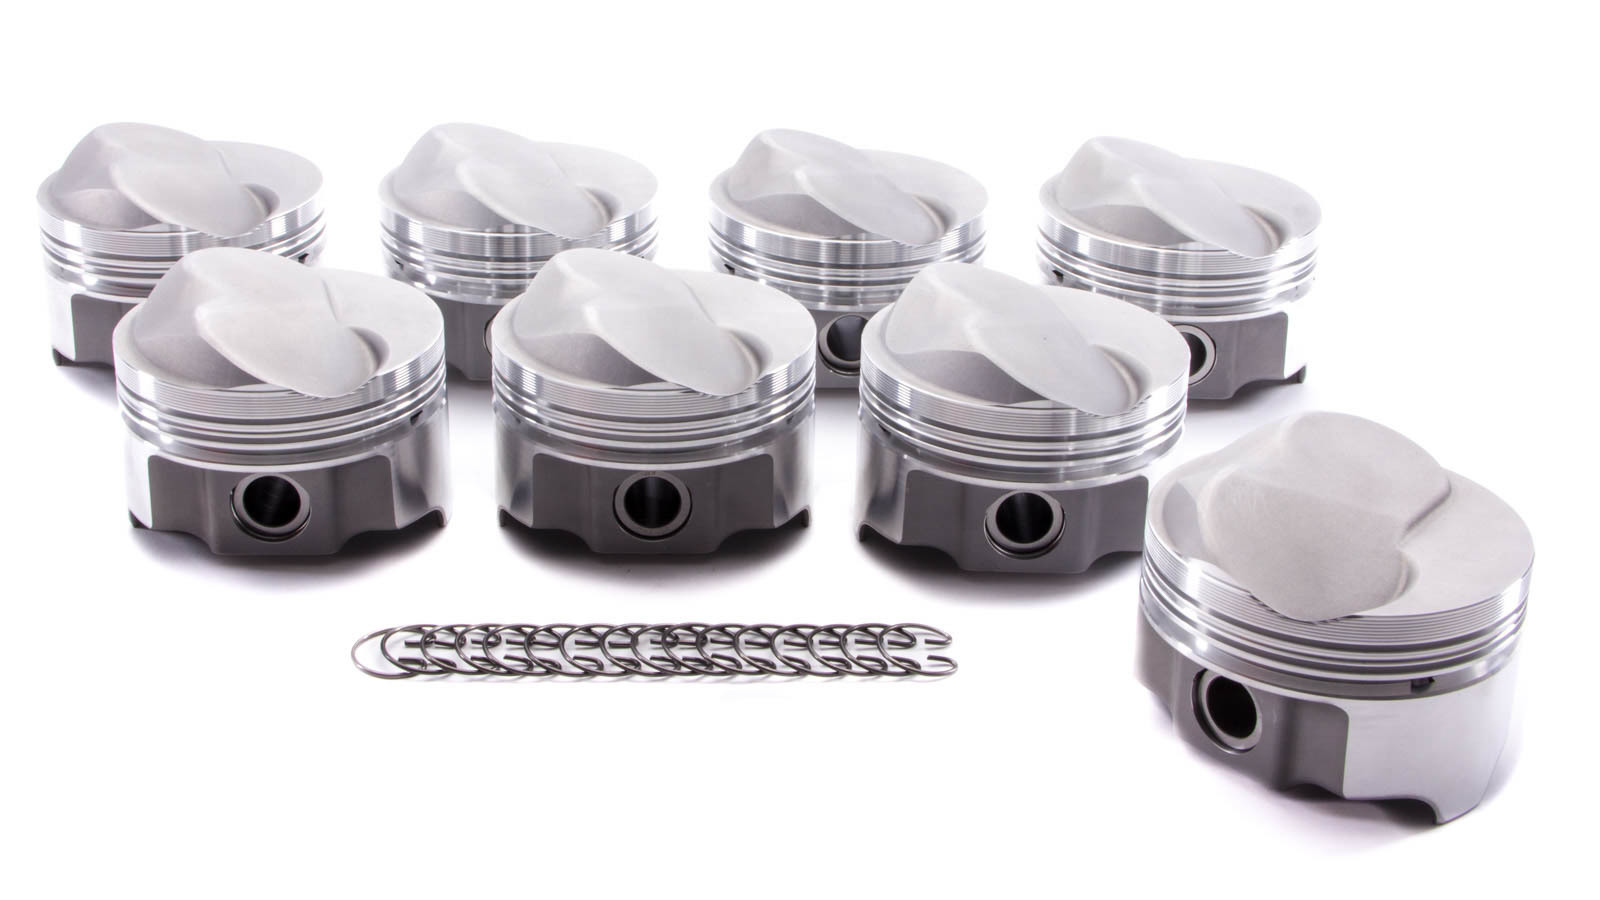 Icon Pistons IC9949.030 Piston, FHR Forged, Forged, 4.155 in Bore, 5/64 x 5/64 x 3/16 in Ring Grooves, Plus 41.00 cc, Big Block Chevy, Set of 8